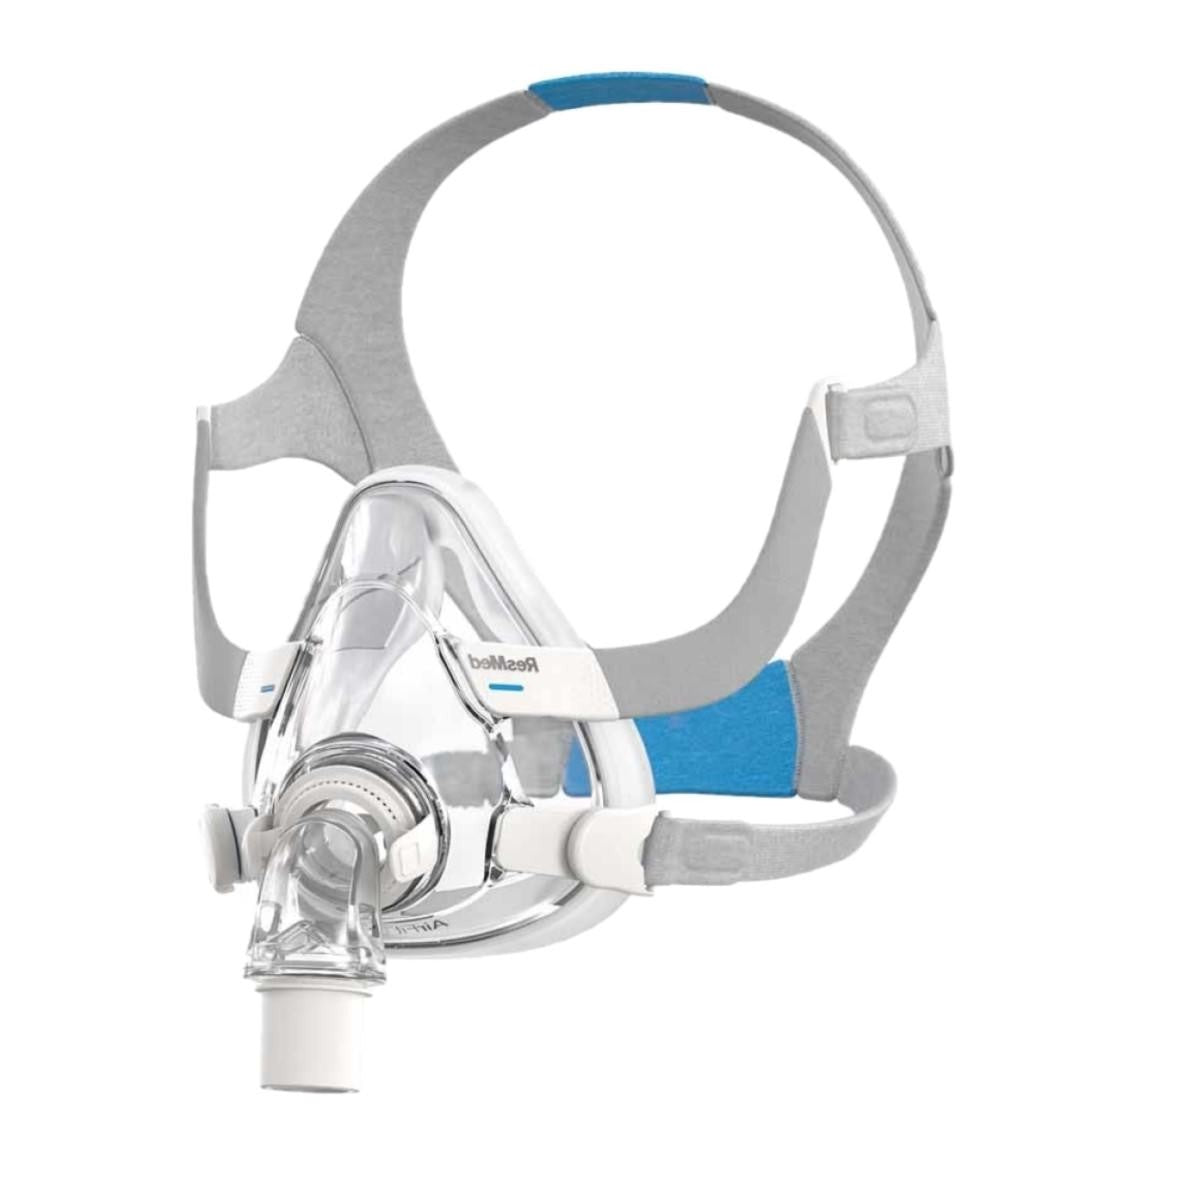 Resmed Airfit F20 Full Face Mask System with Headgear